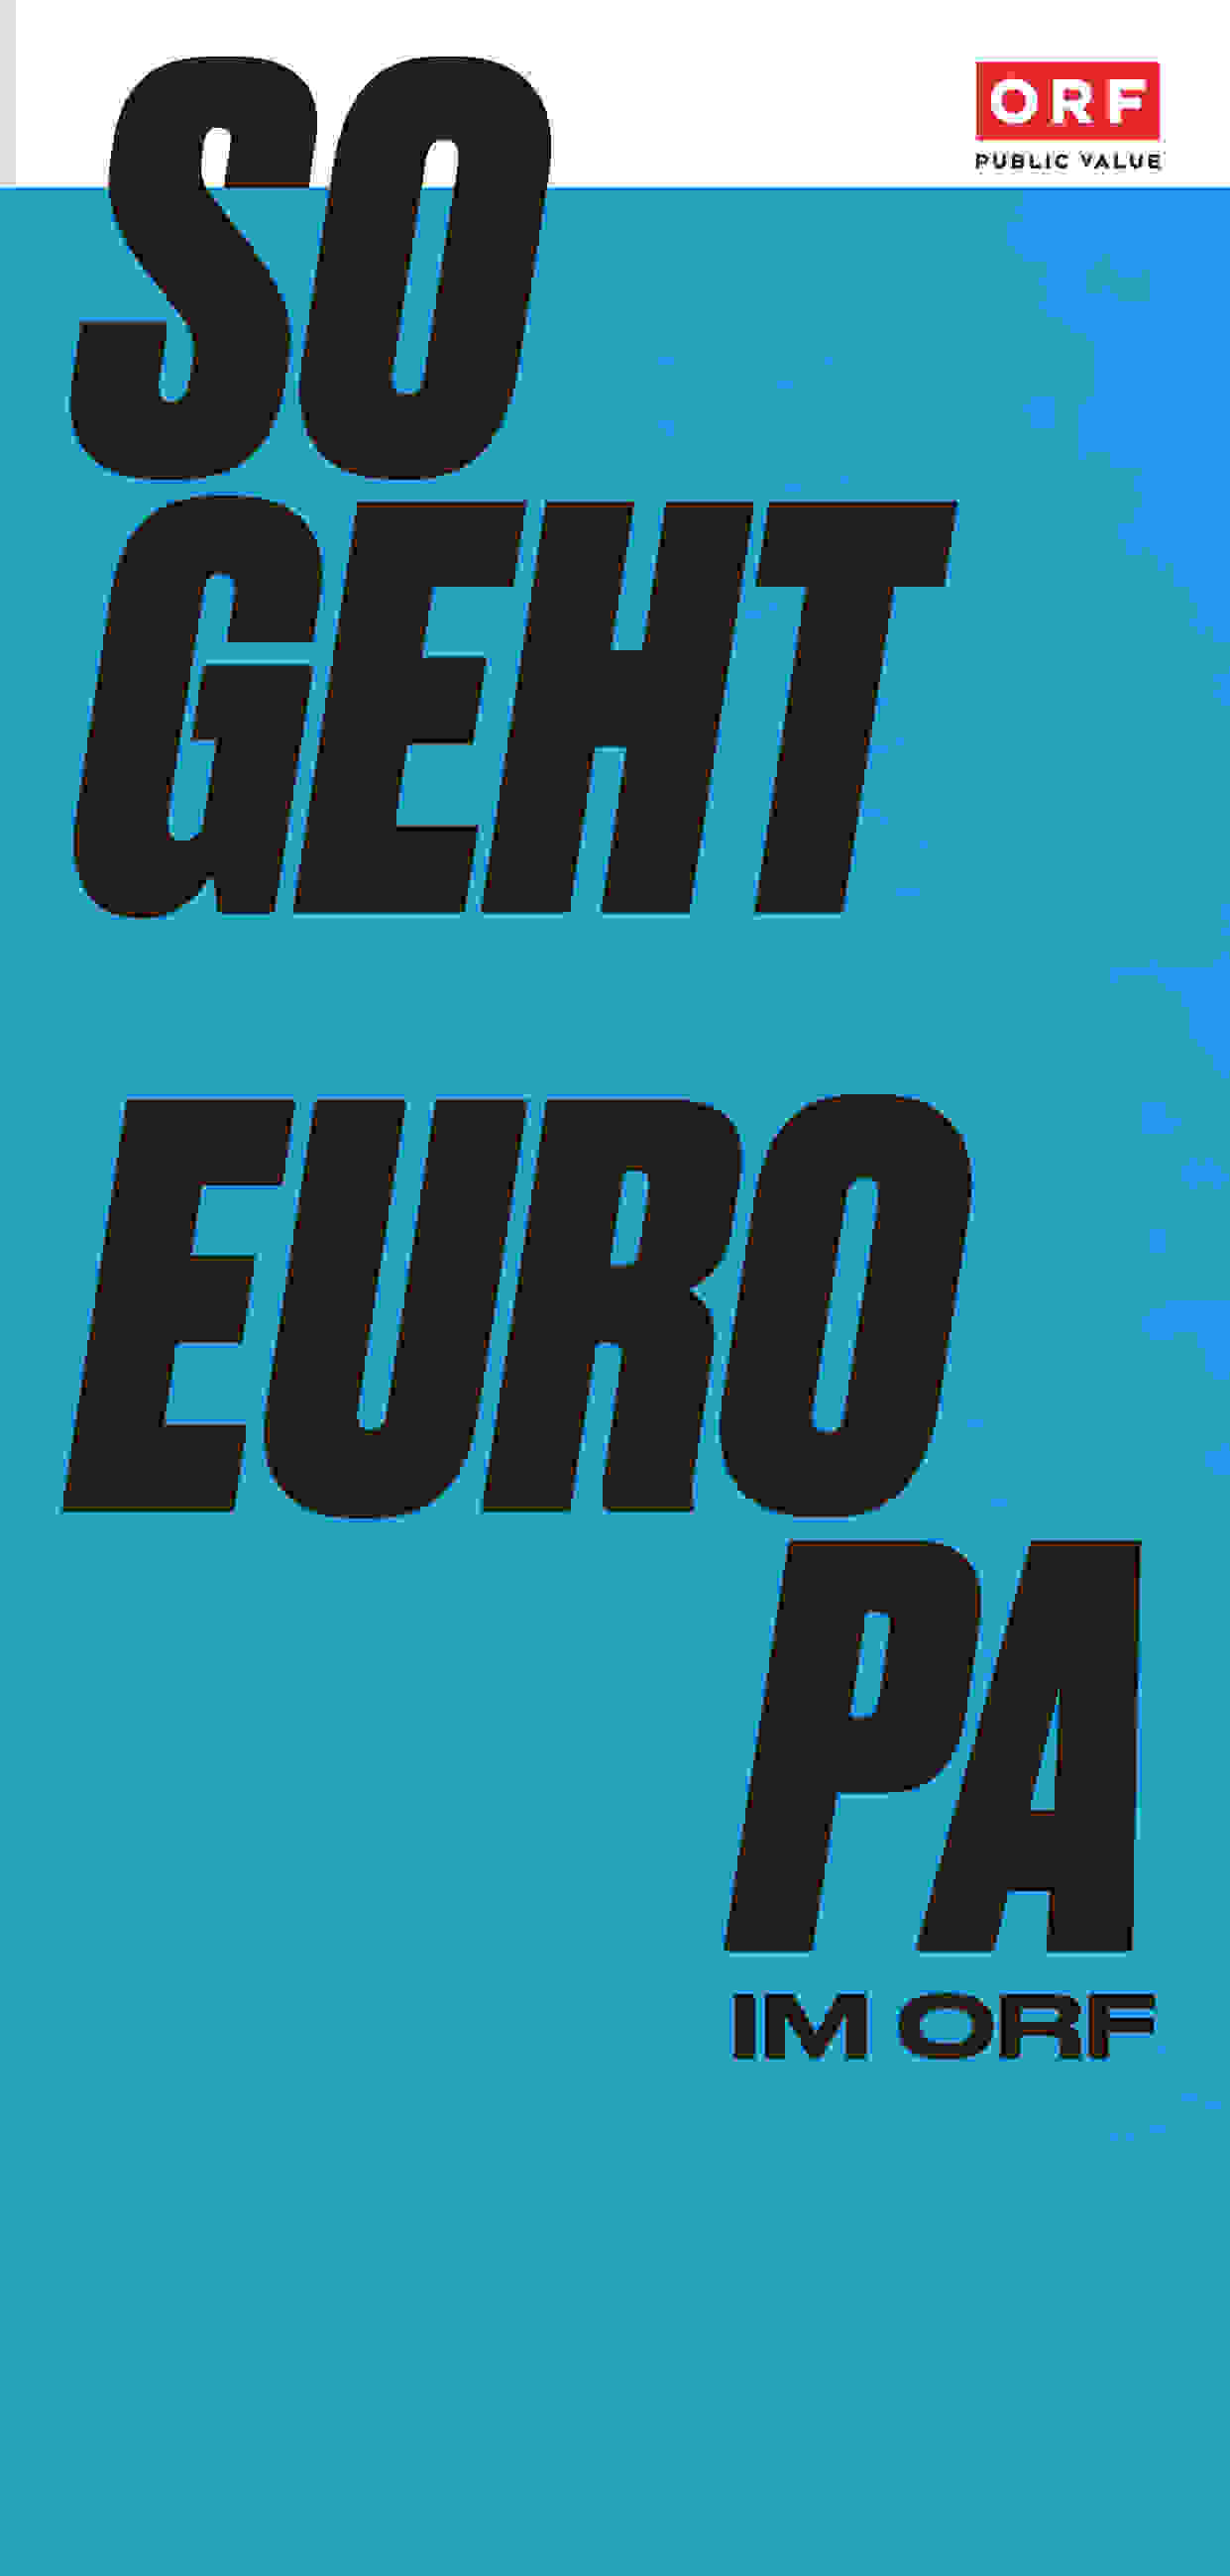 ORF PV 2020 Slider Cover Europa